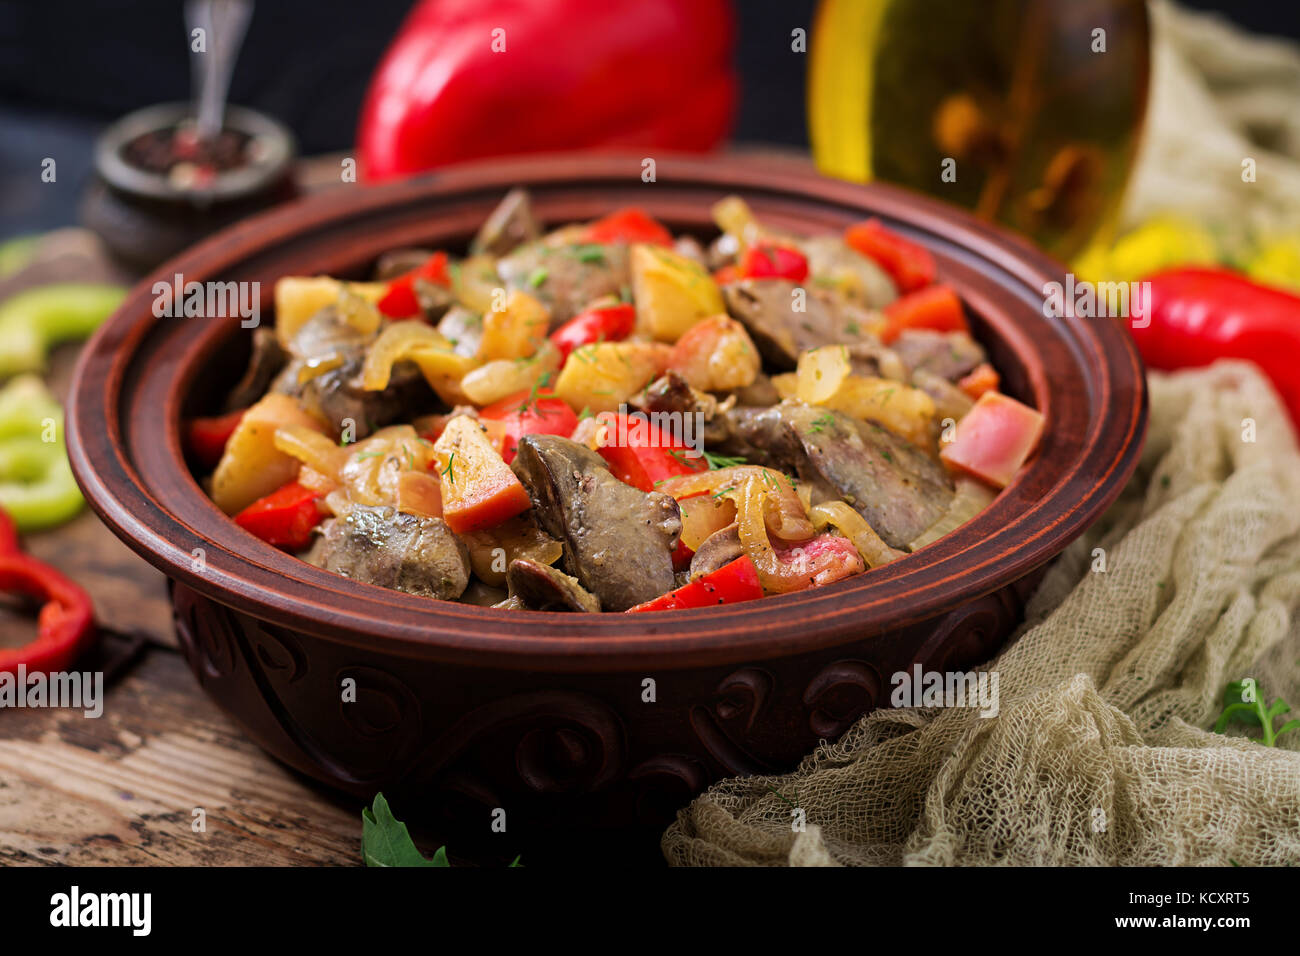 Roast chicken liver with vegetables on wooden background. Stock Photo